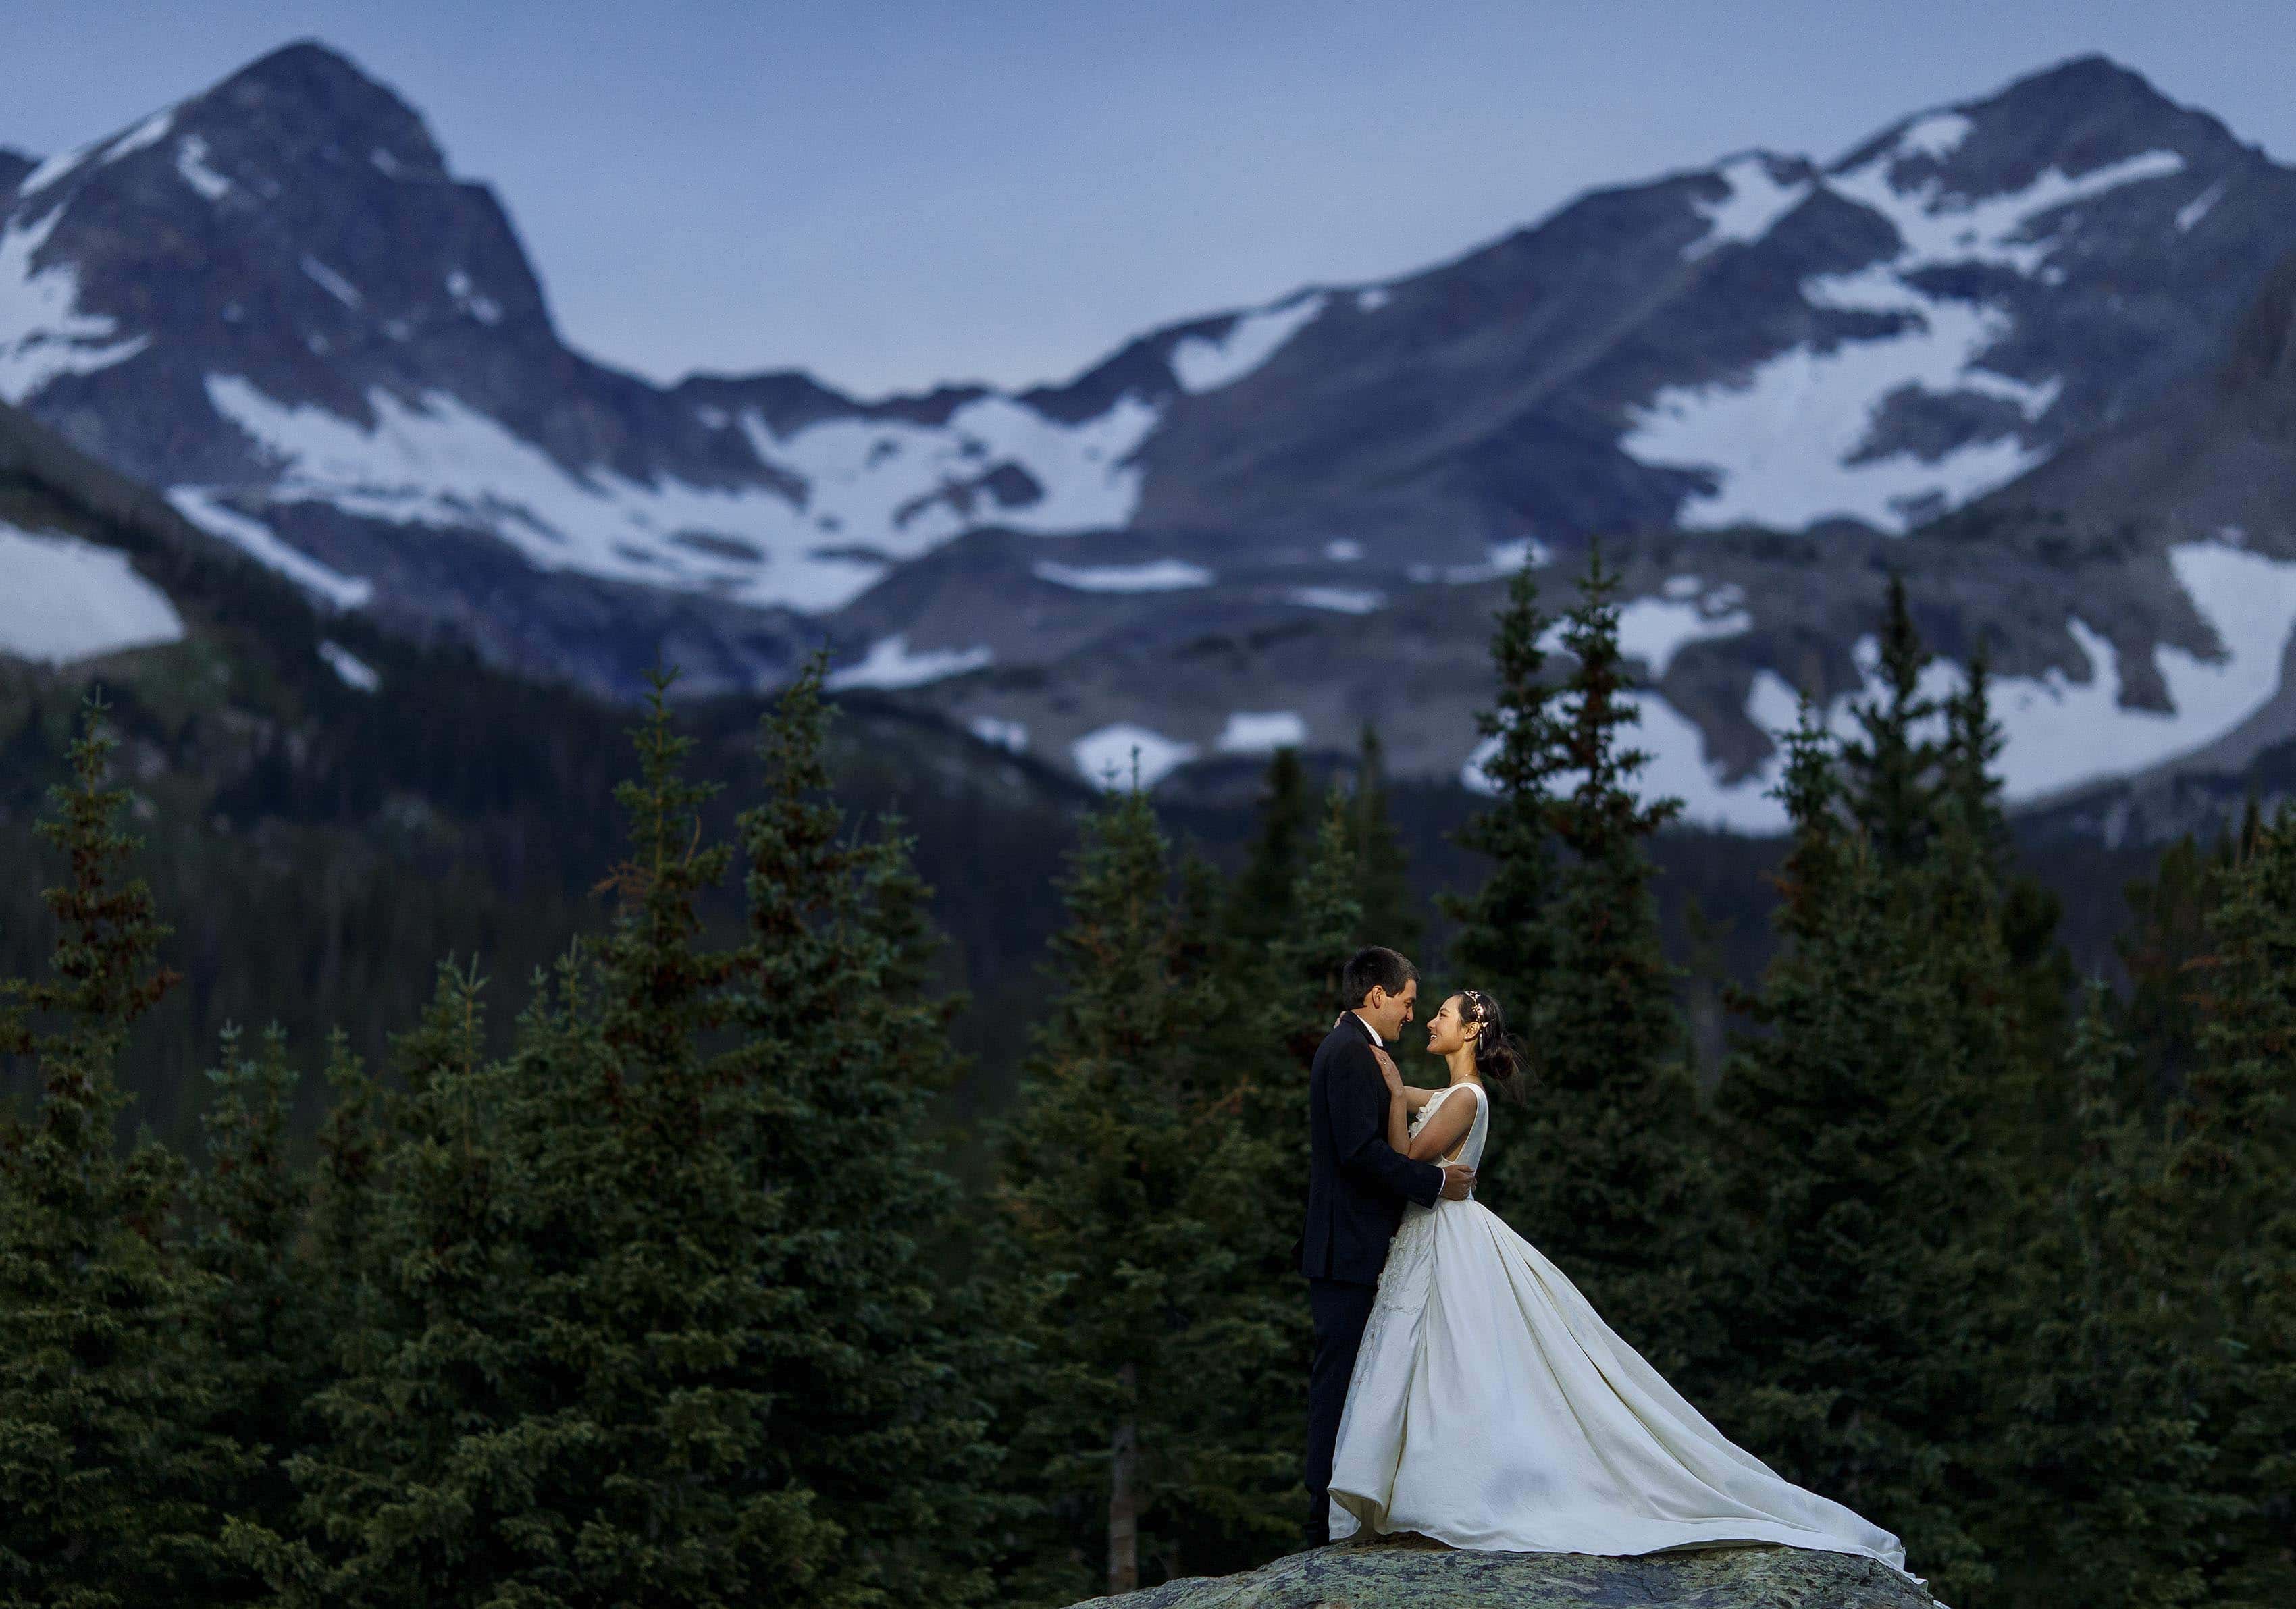 The newlyweds share a moment together at Brainard Lake during their mountain elopement near Ward, Colorado